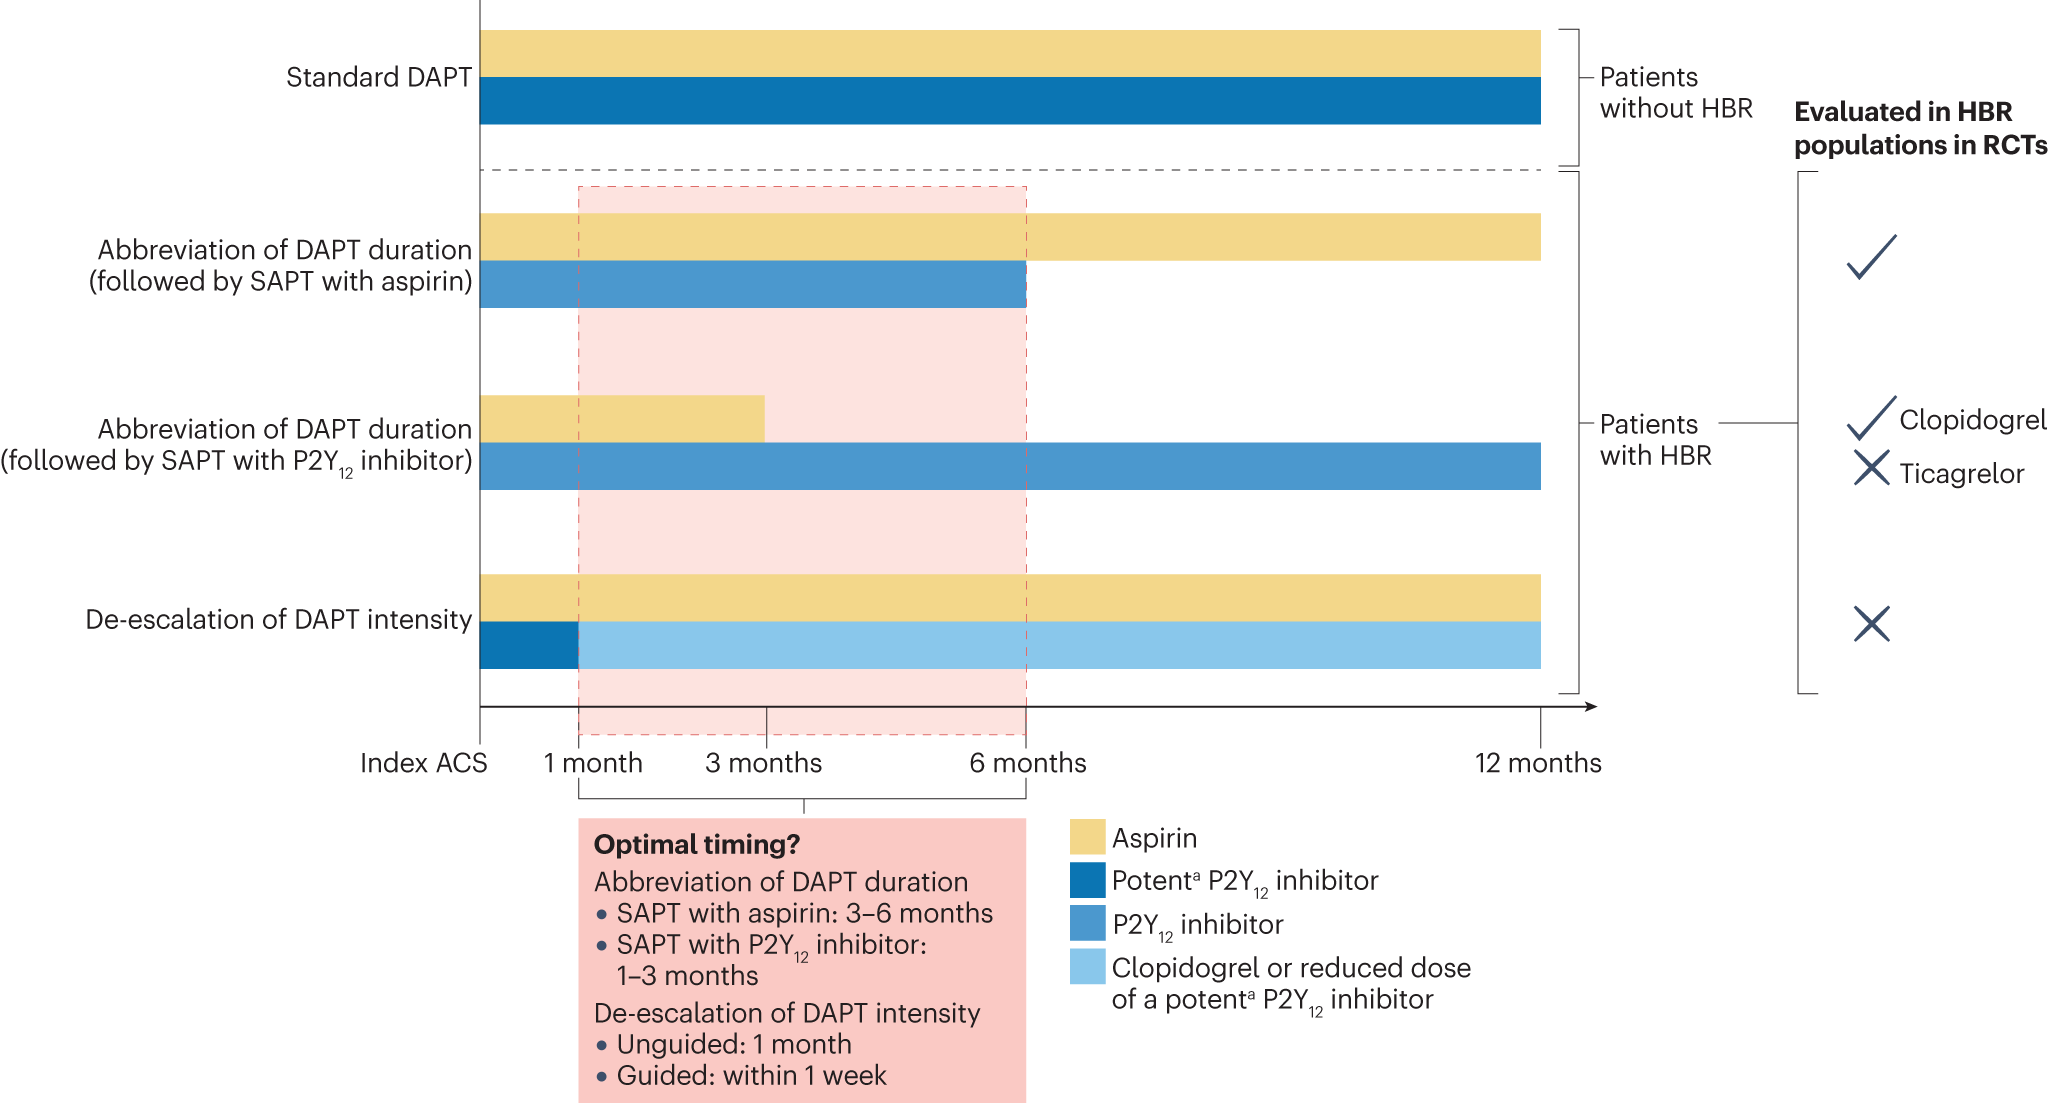 De-escalation or abbreviation of dual antiplatelet therapy in acute  coronary syndromes and percutaneous coronary intervention: a Consensus  Statement from an international expert panel on coronary thrombosis |  Nature Reviews Cardiology